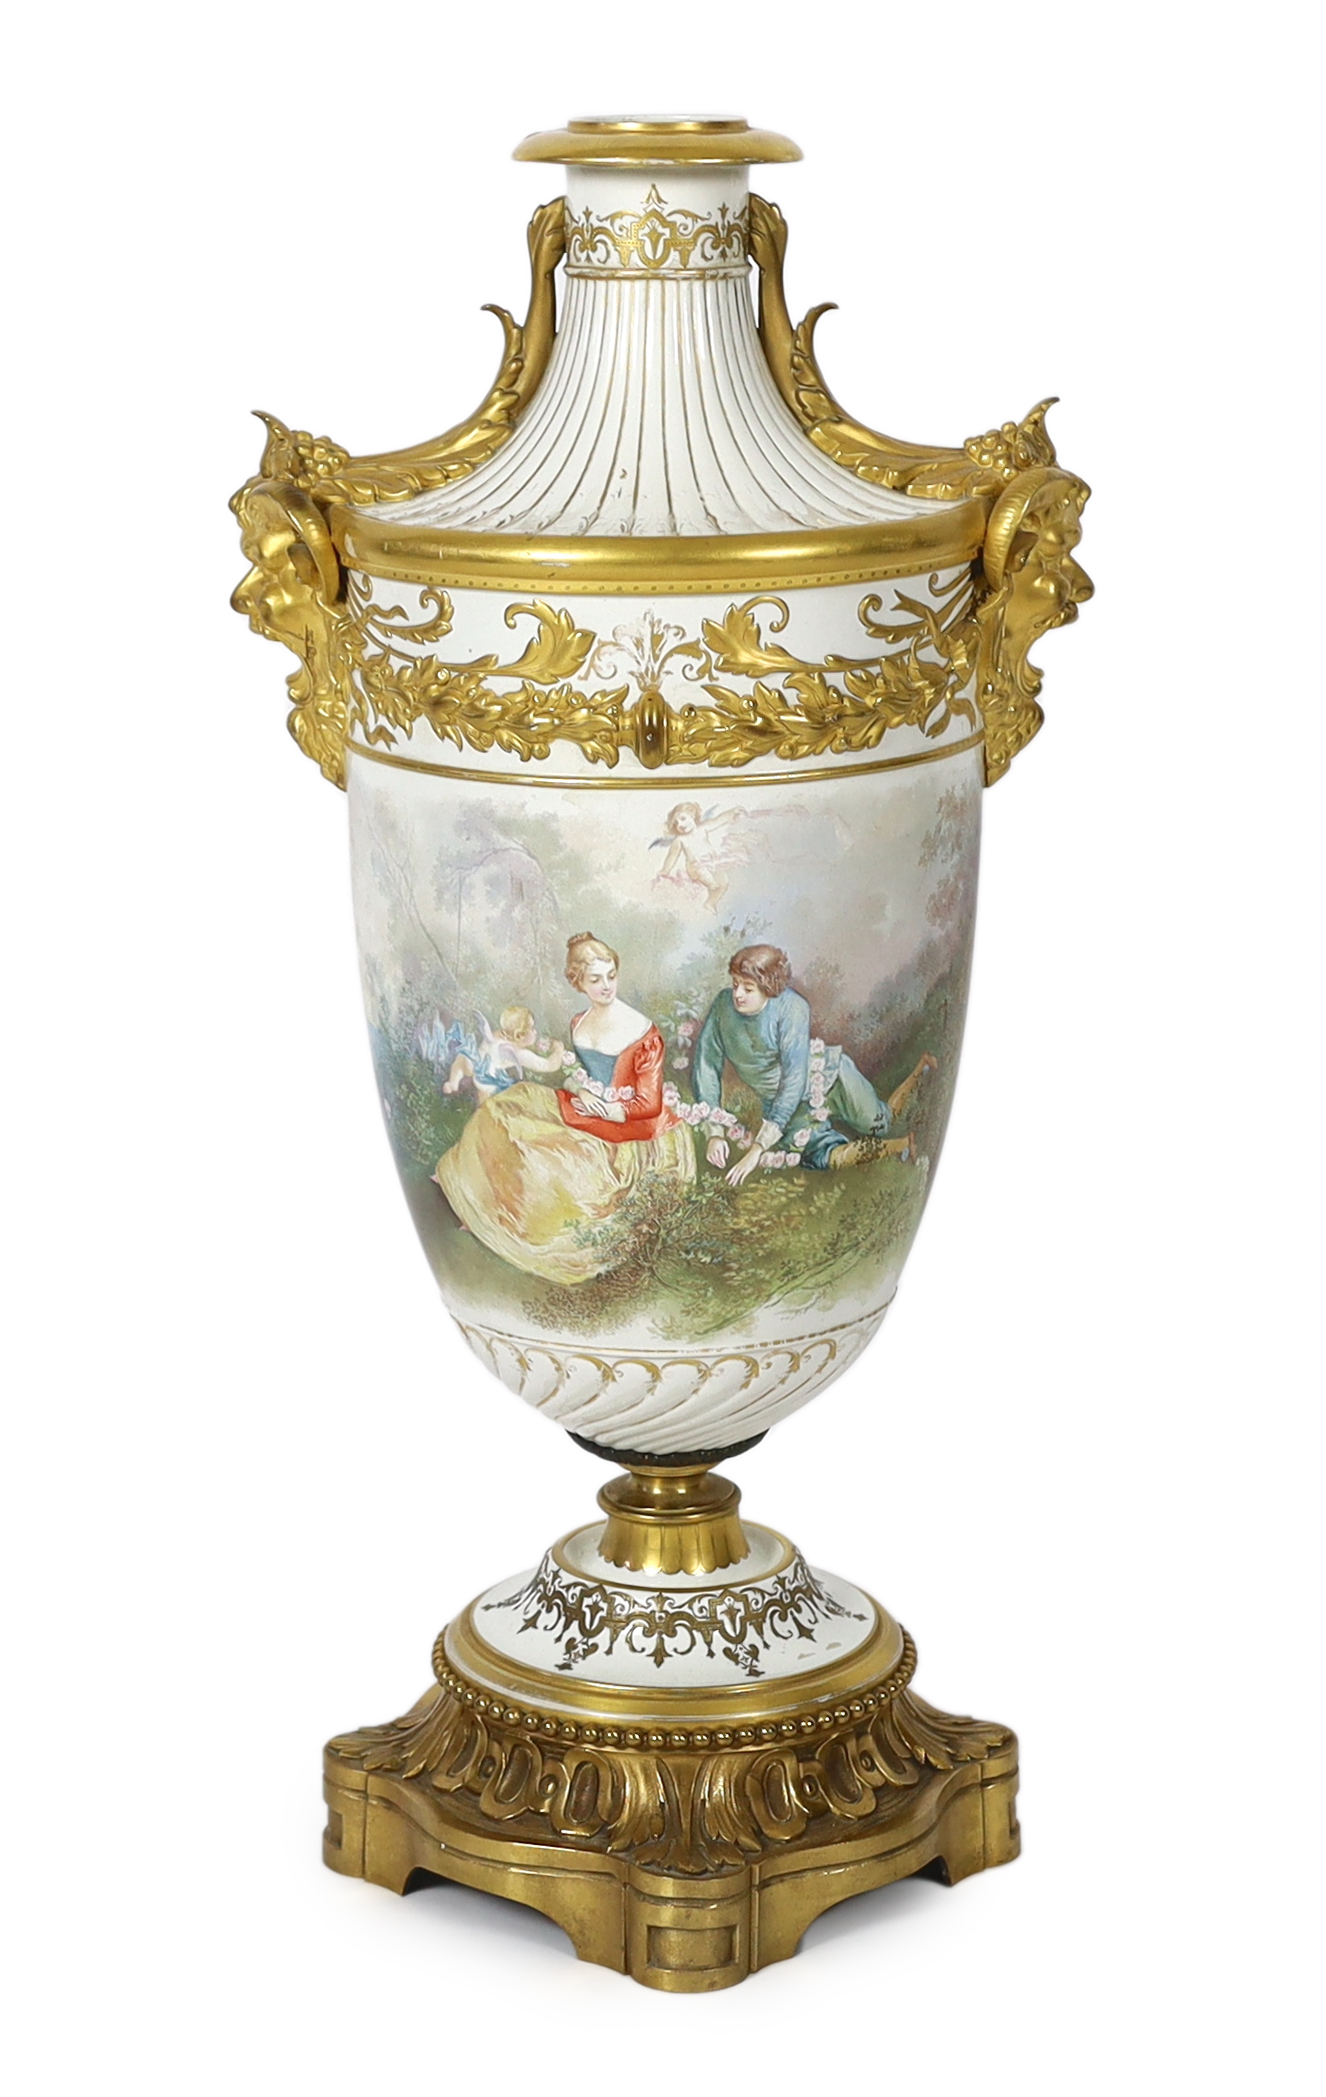 A large French porcelain and ormolu mounted vase, late 19th century, wear to gilding                                                                                                                                        